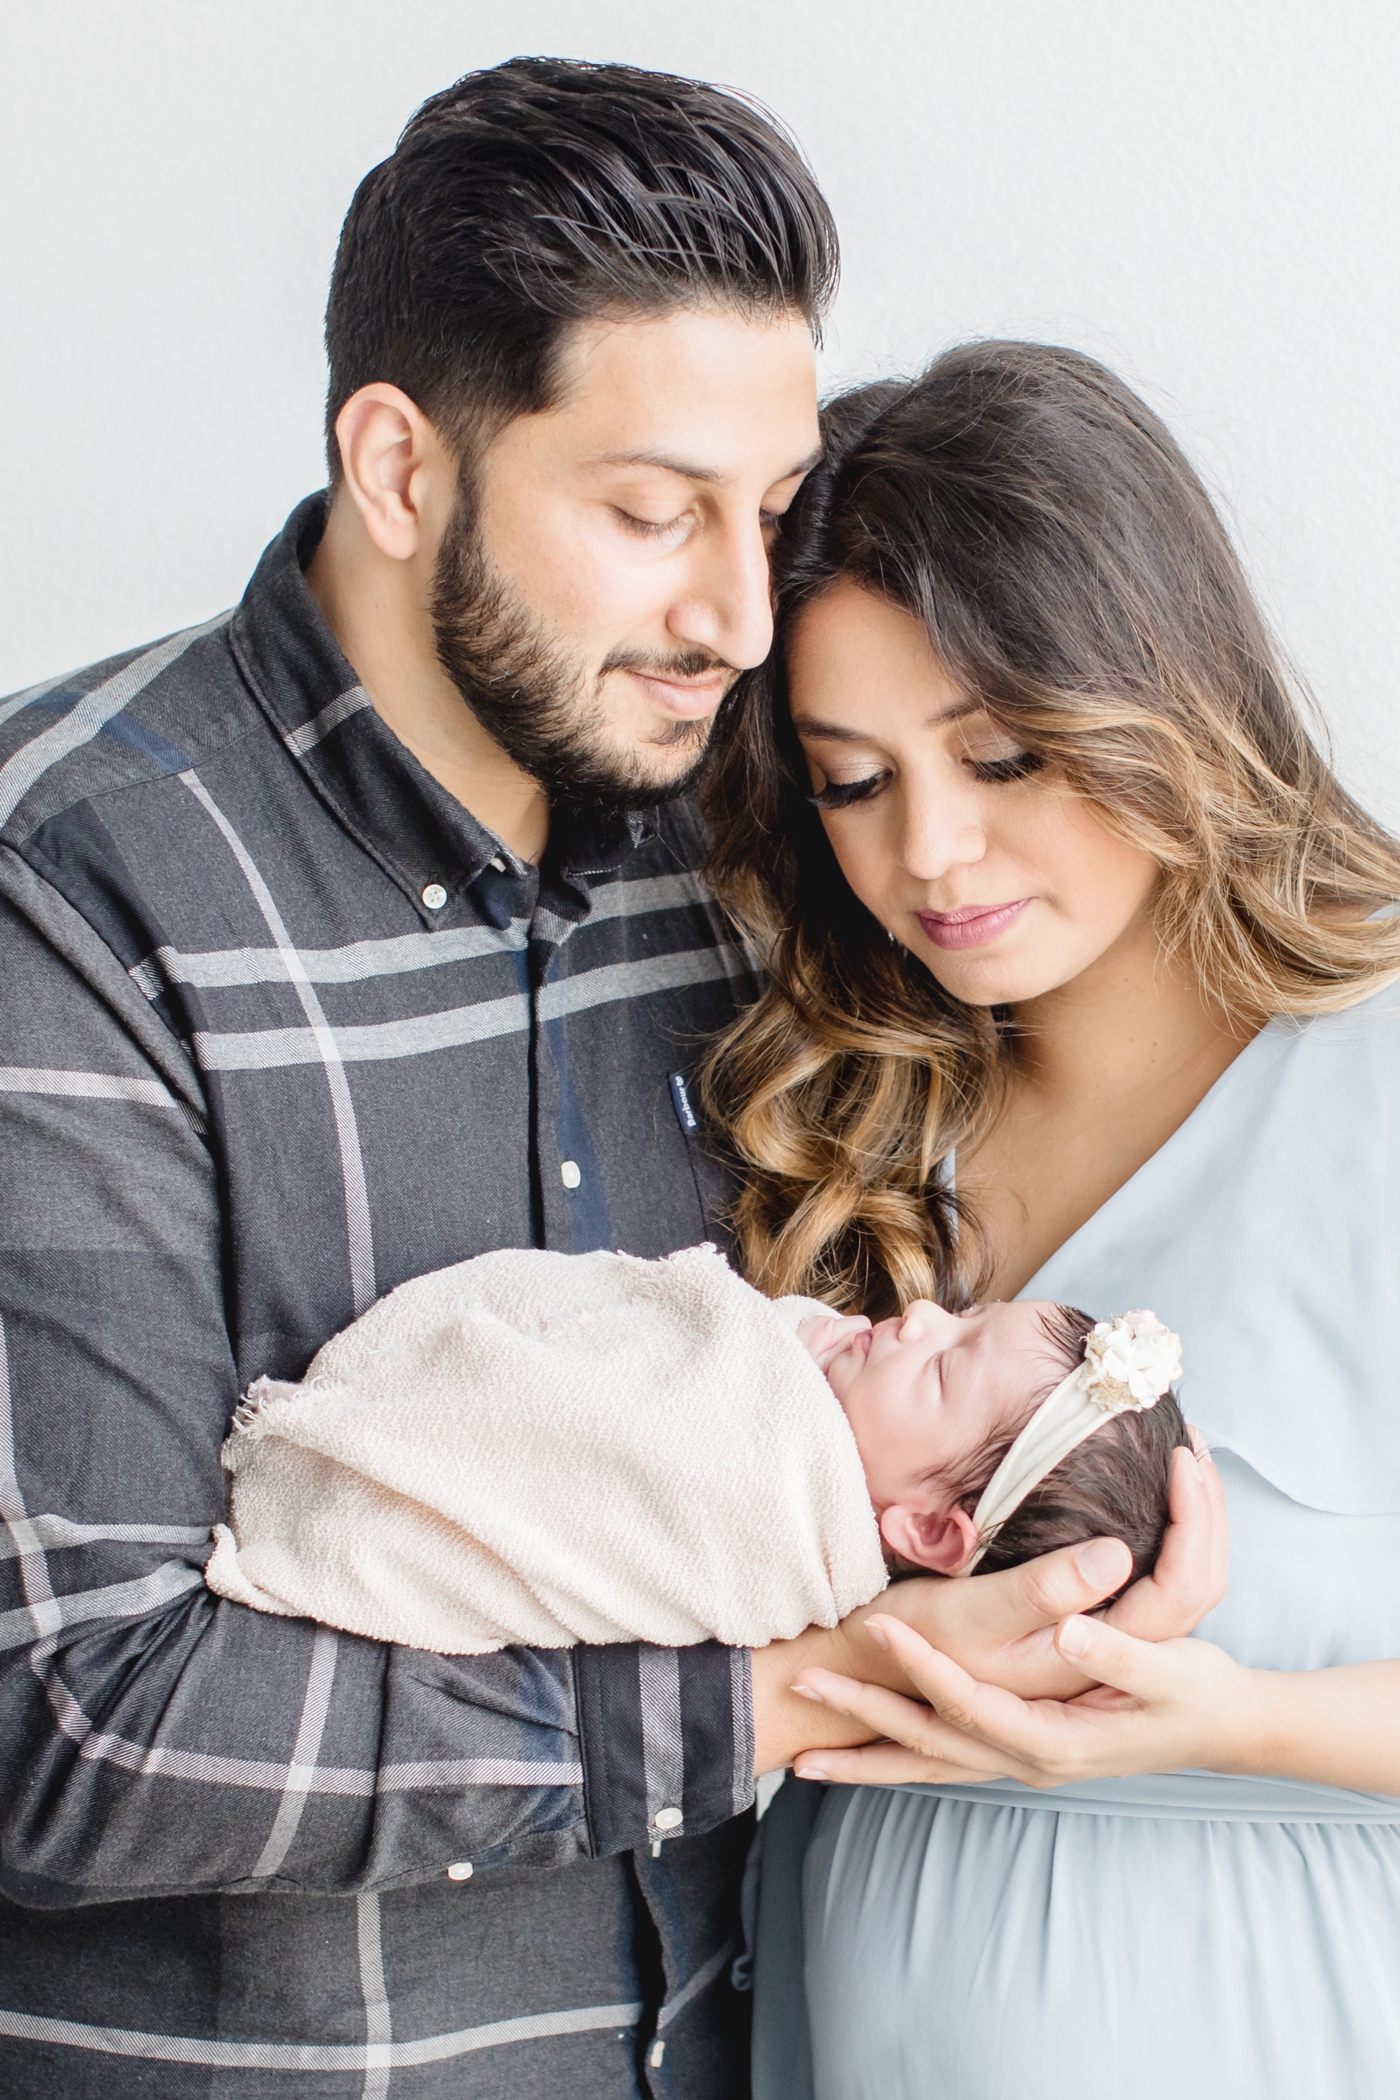 Mom and dad holding baby girl during newborn session. Photo by Sana Ahmed Photography